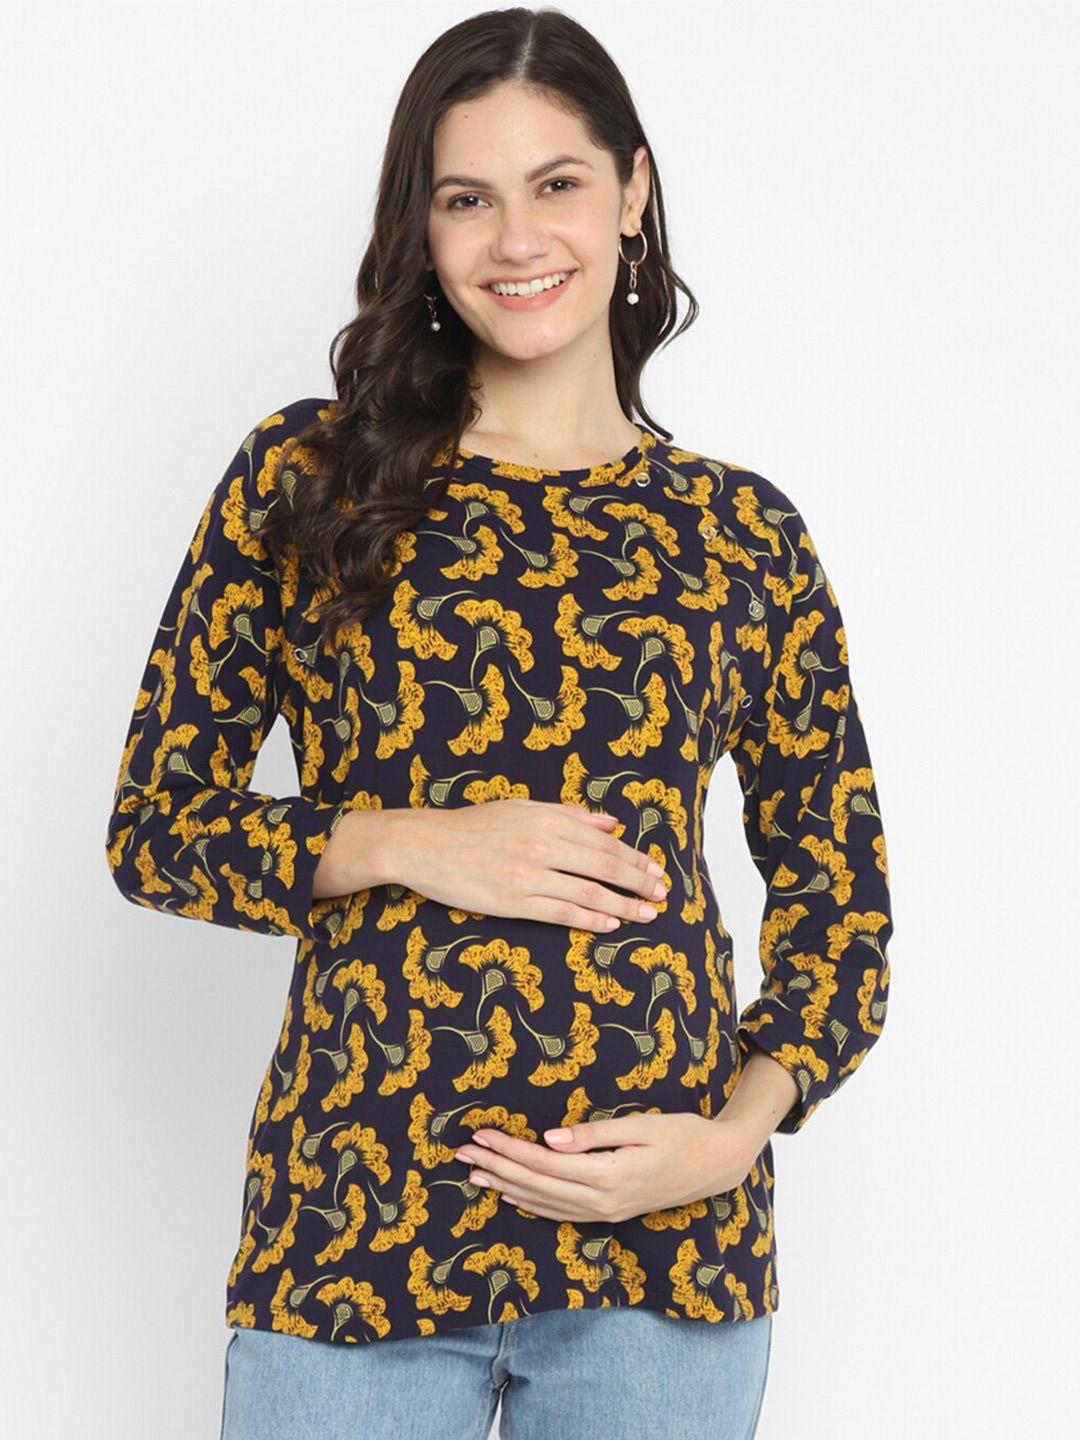 momsoon women maternity yellow floral print top